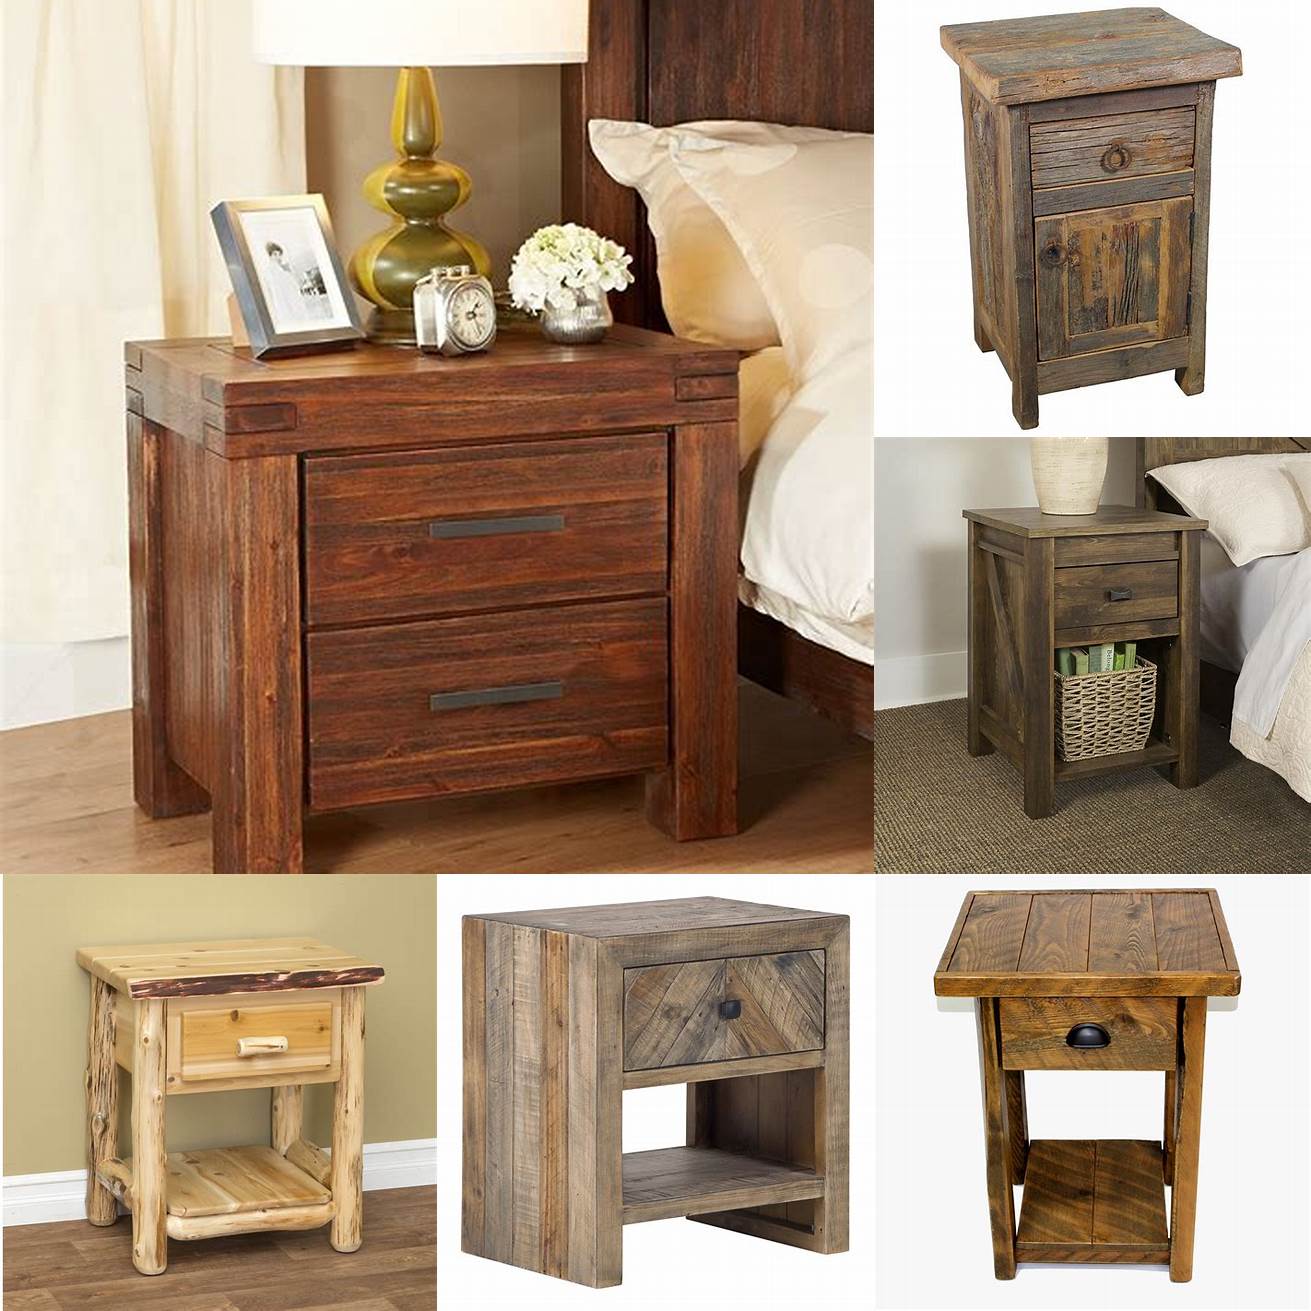 This rustic wooden nightstand adds warmth and character to this bedroom